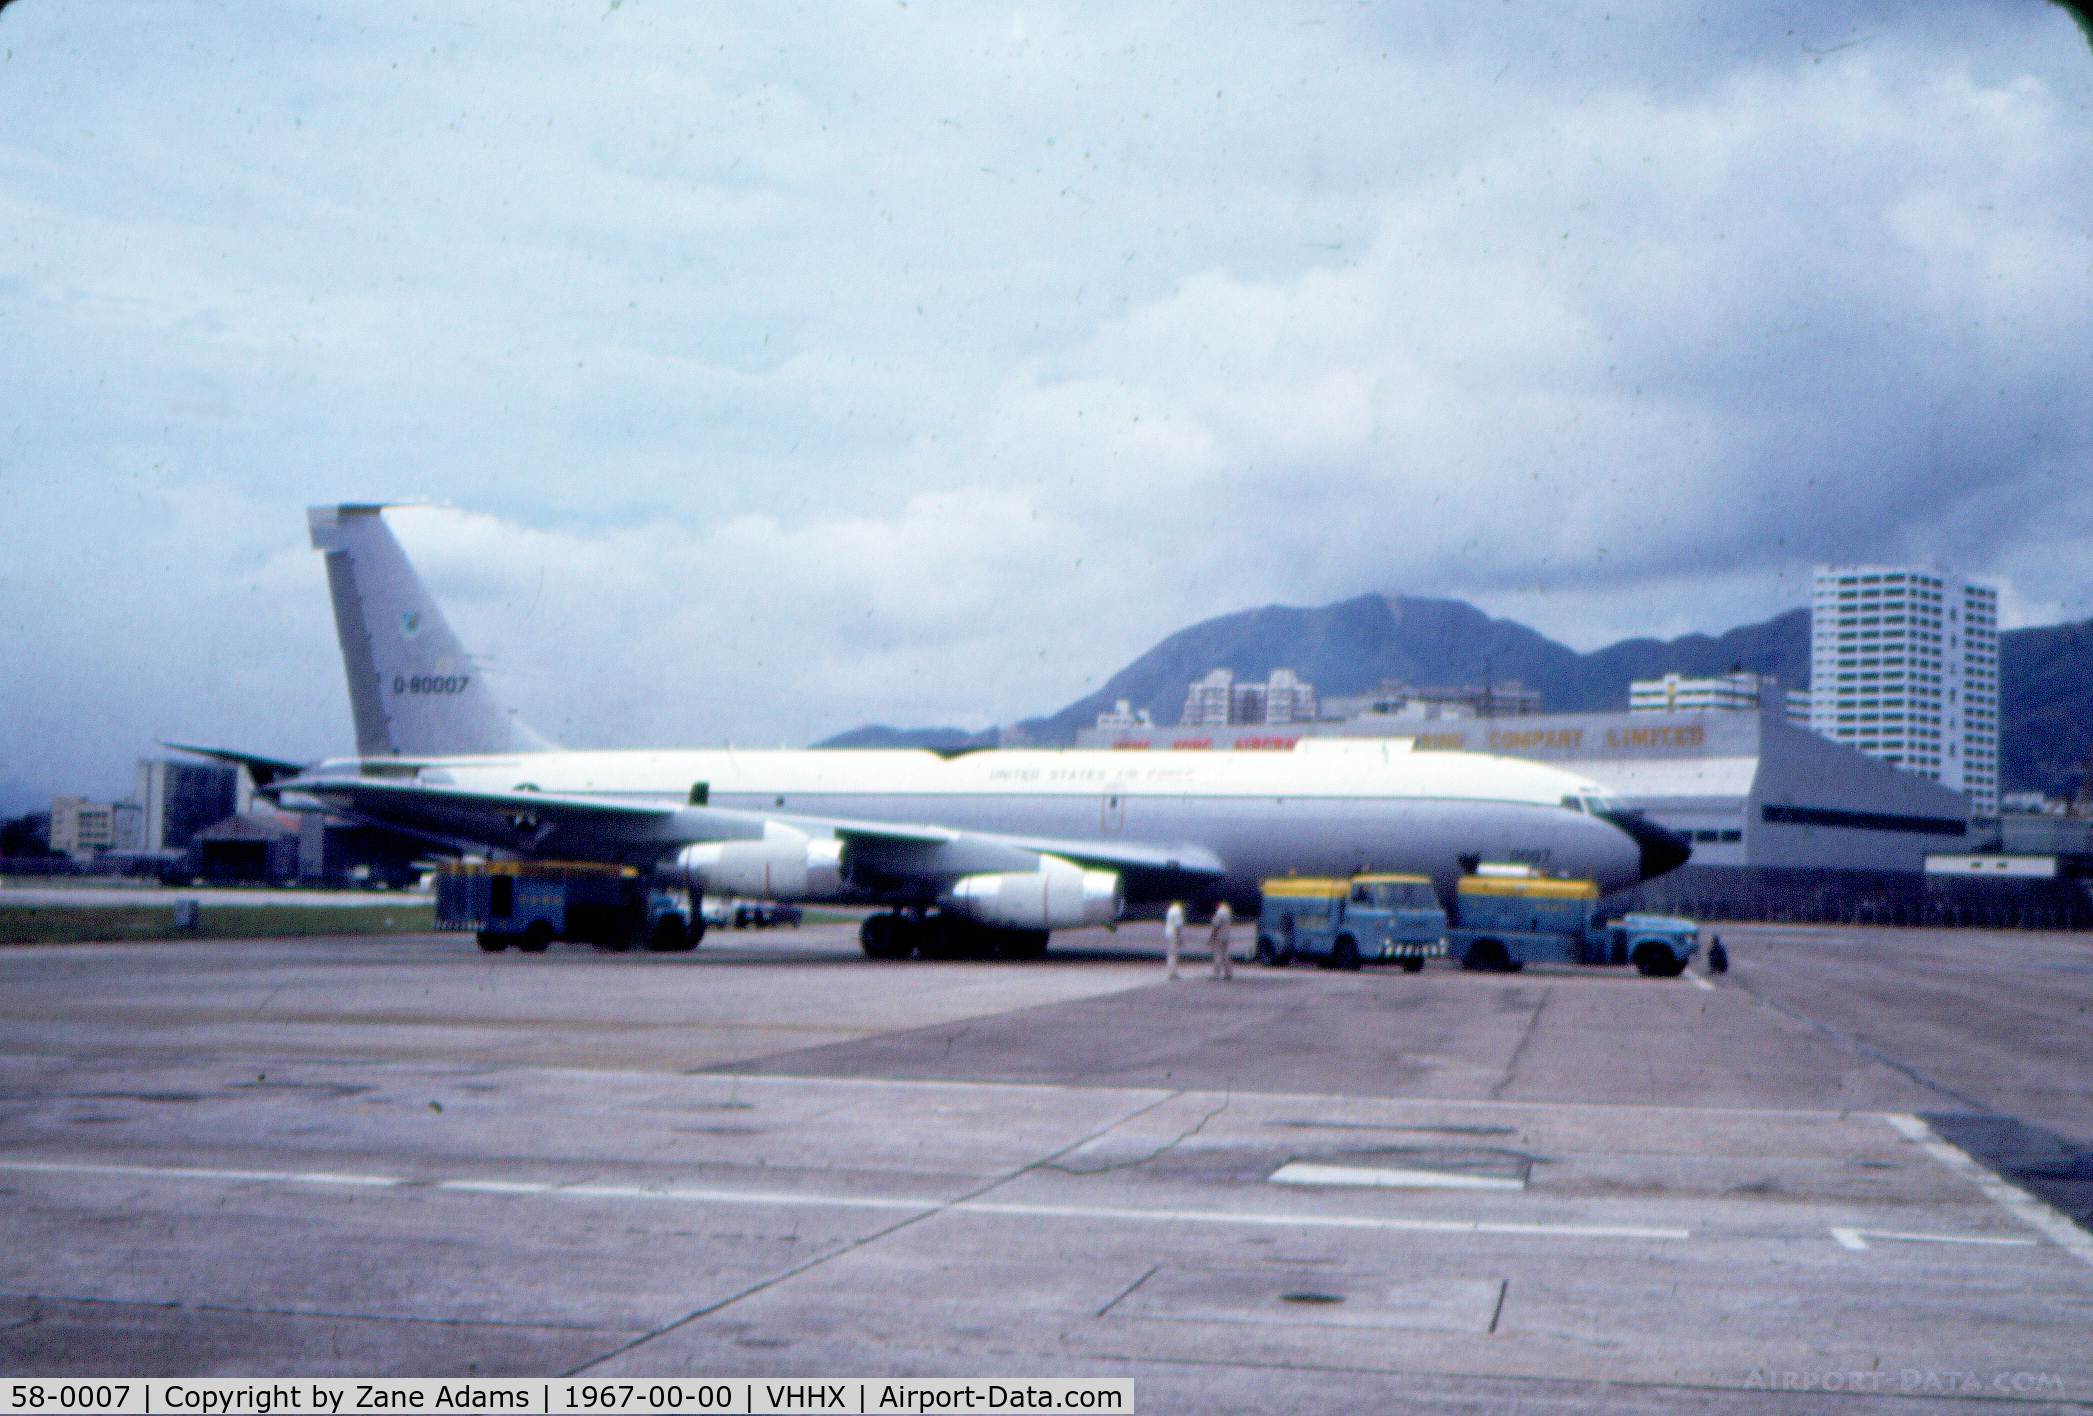 58-0007, 1958 Boeing EC-135P C/N 17752, Photographed in Hong Kong - scanned from a 35mm slide bought at an estate sale.